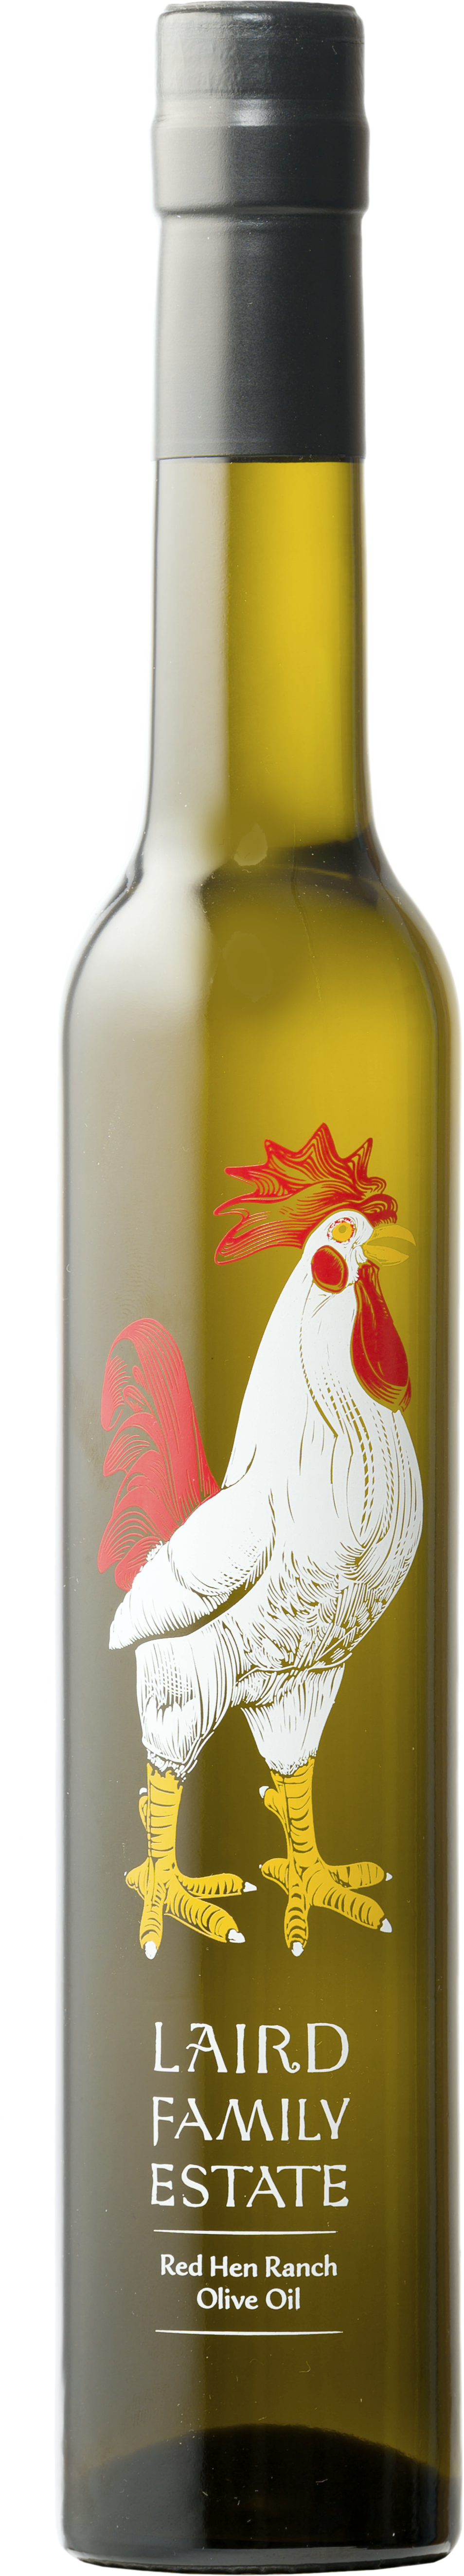 Product Image for Big Reds Olive Oil